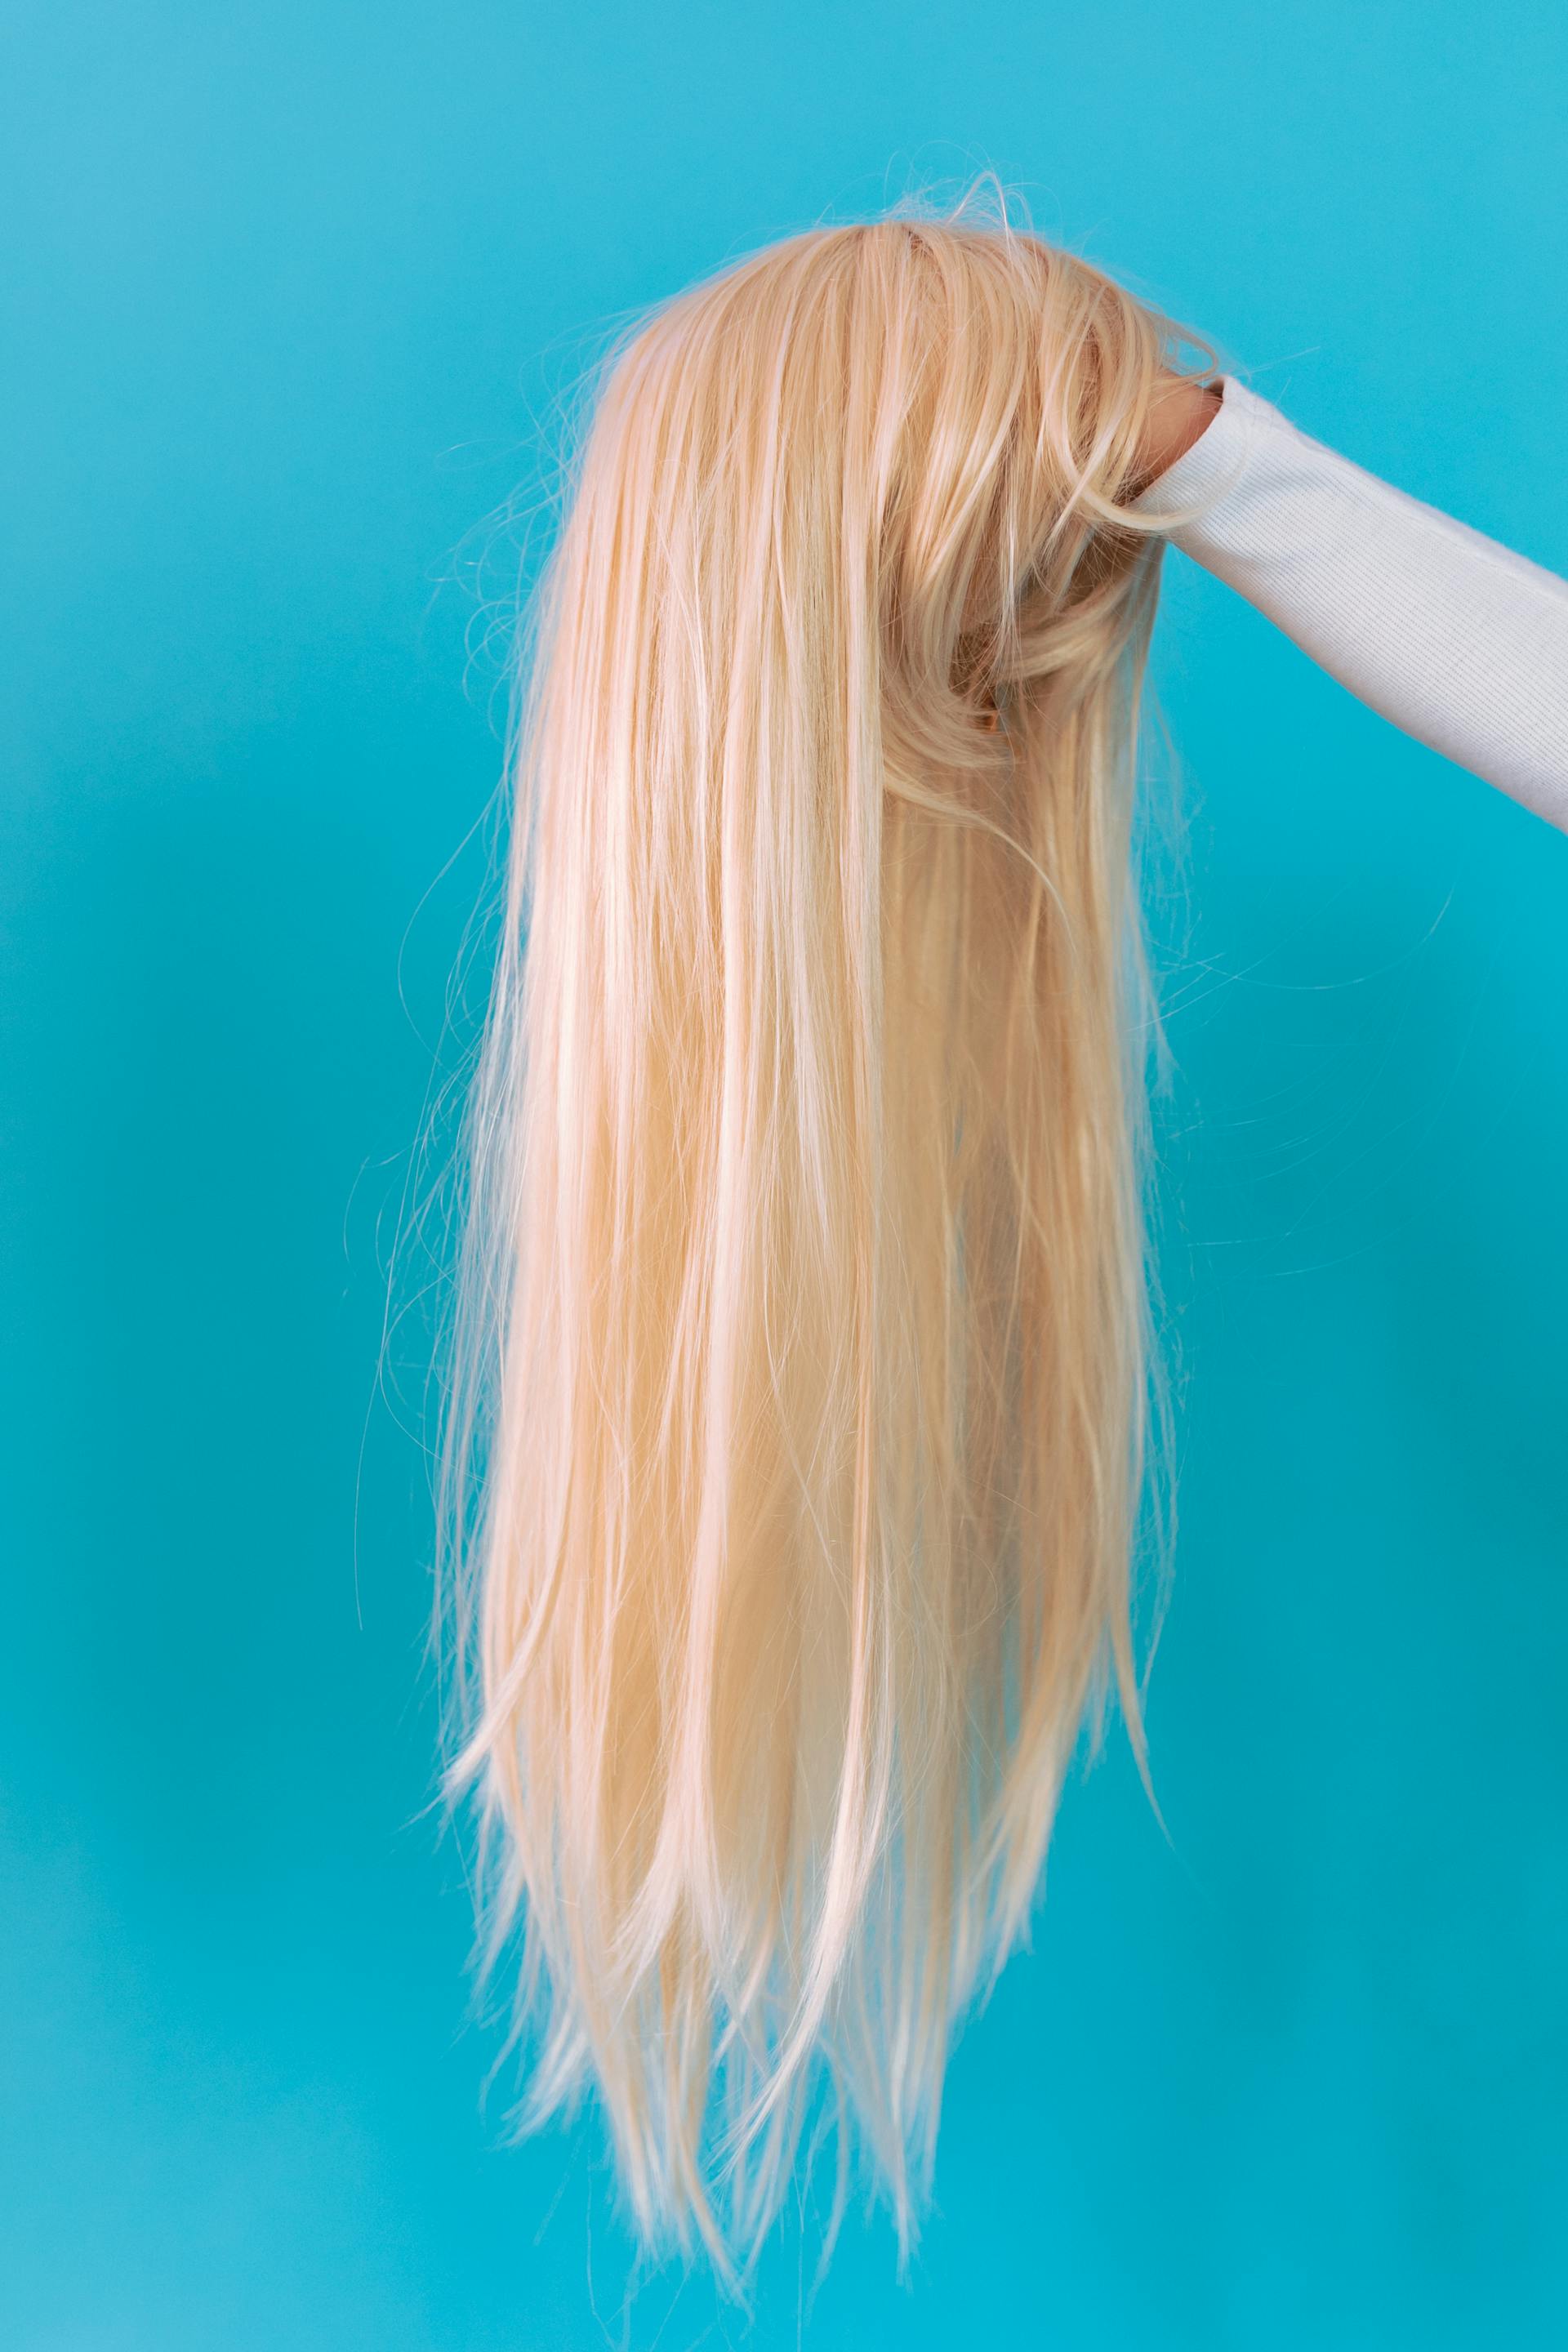 Woman holding a blonde wig | Source: Pexels